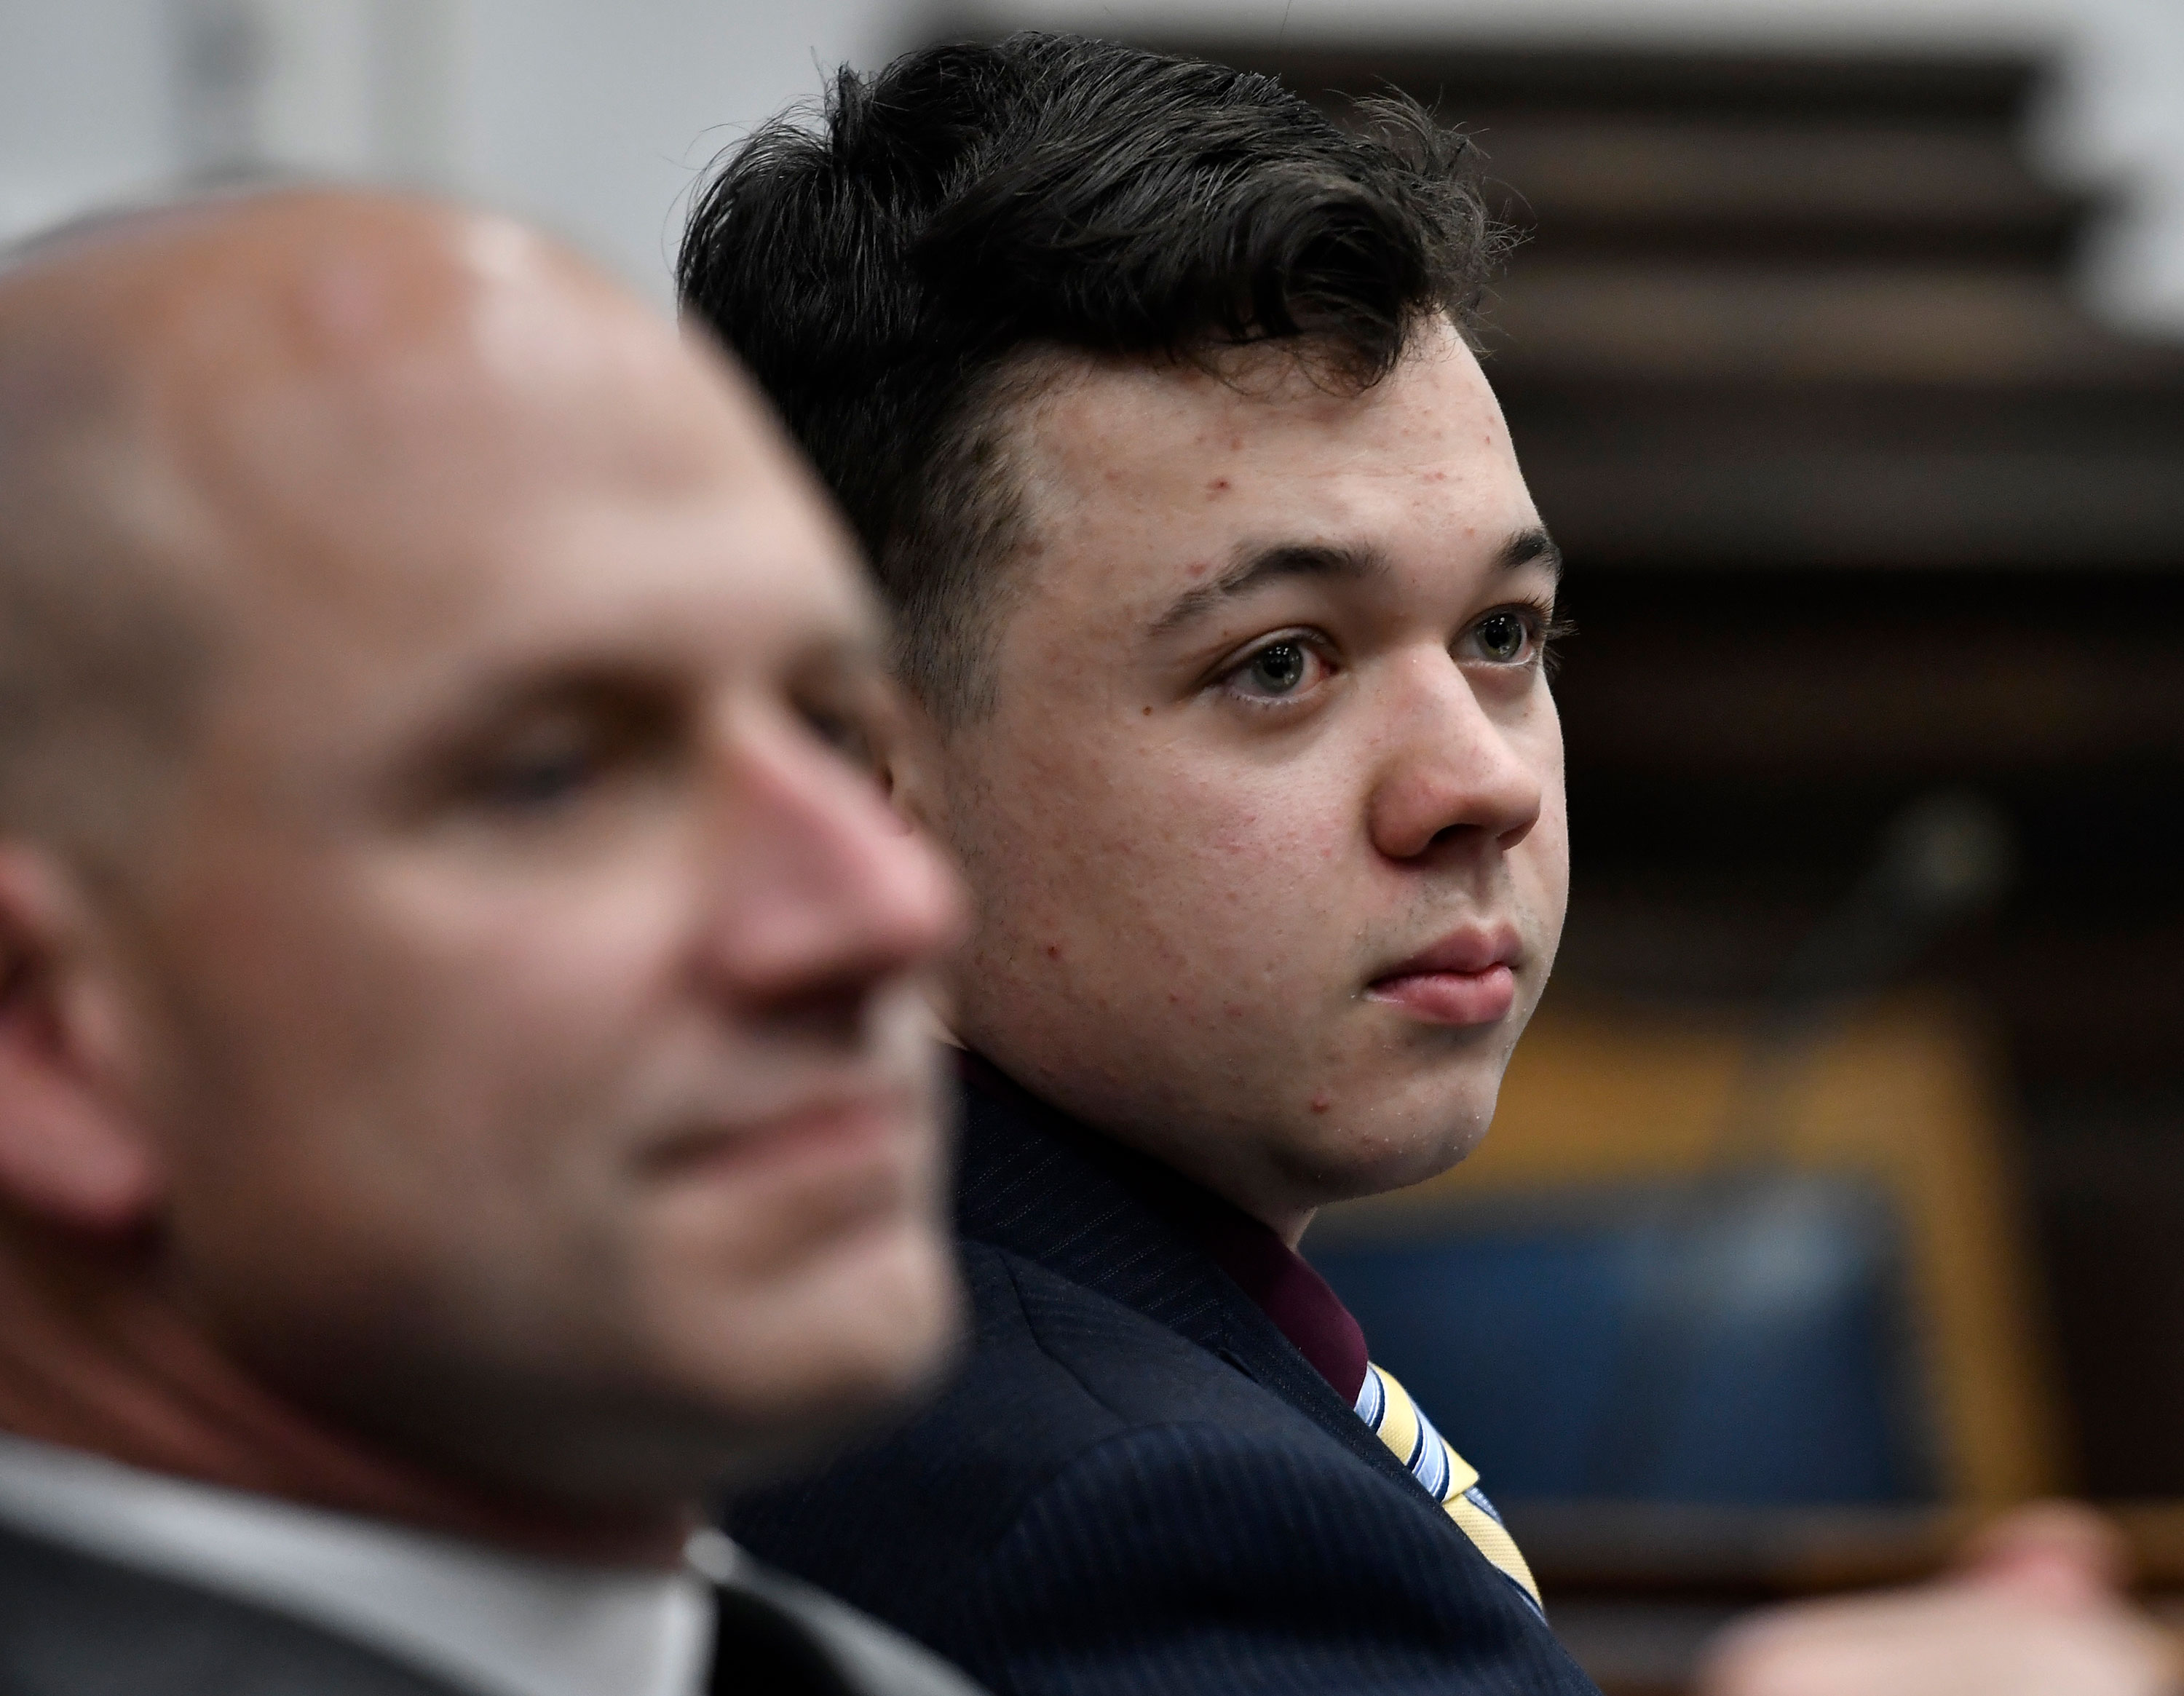 Kyle Rittenhouse and his attorney Corey Chirafisi listen during the trial in Kenosha on November 11.